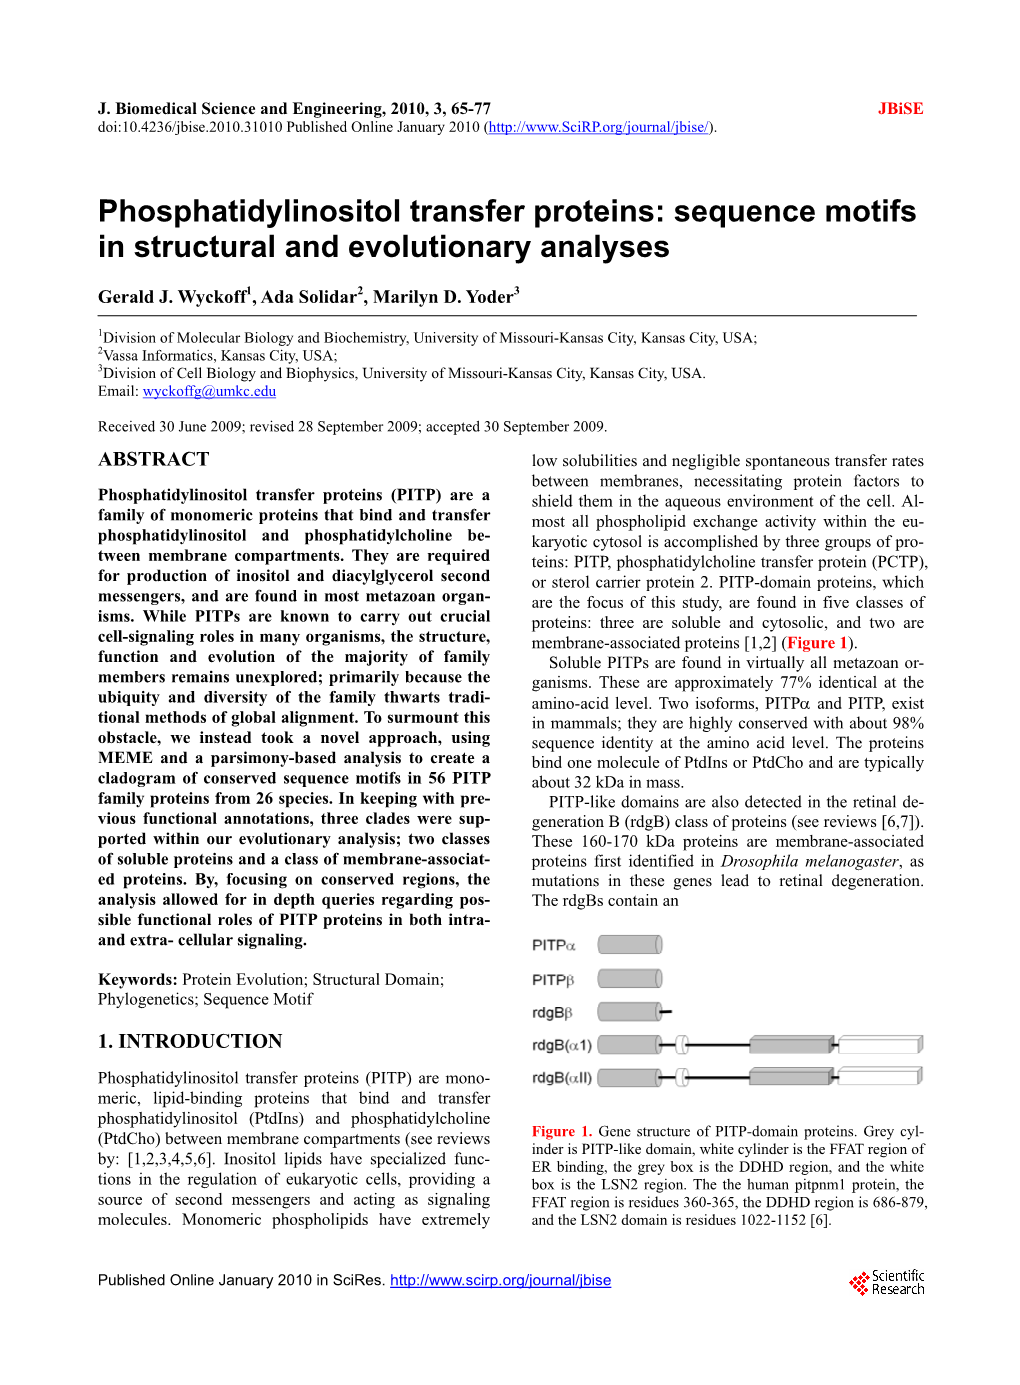 Phosphatidylinositol Transfer Proteins: Sequence Motifs in Structural and Evolutionary Analyses